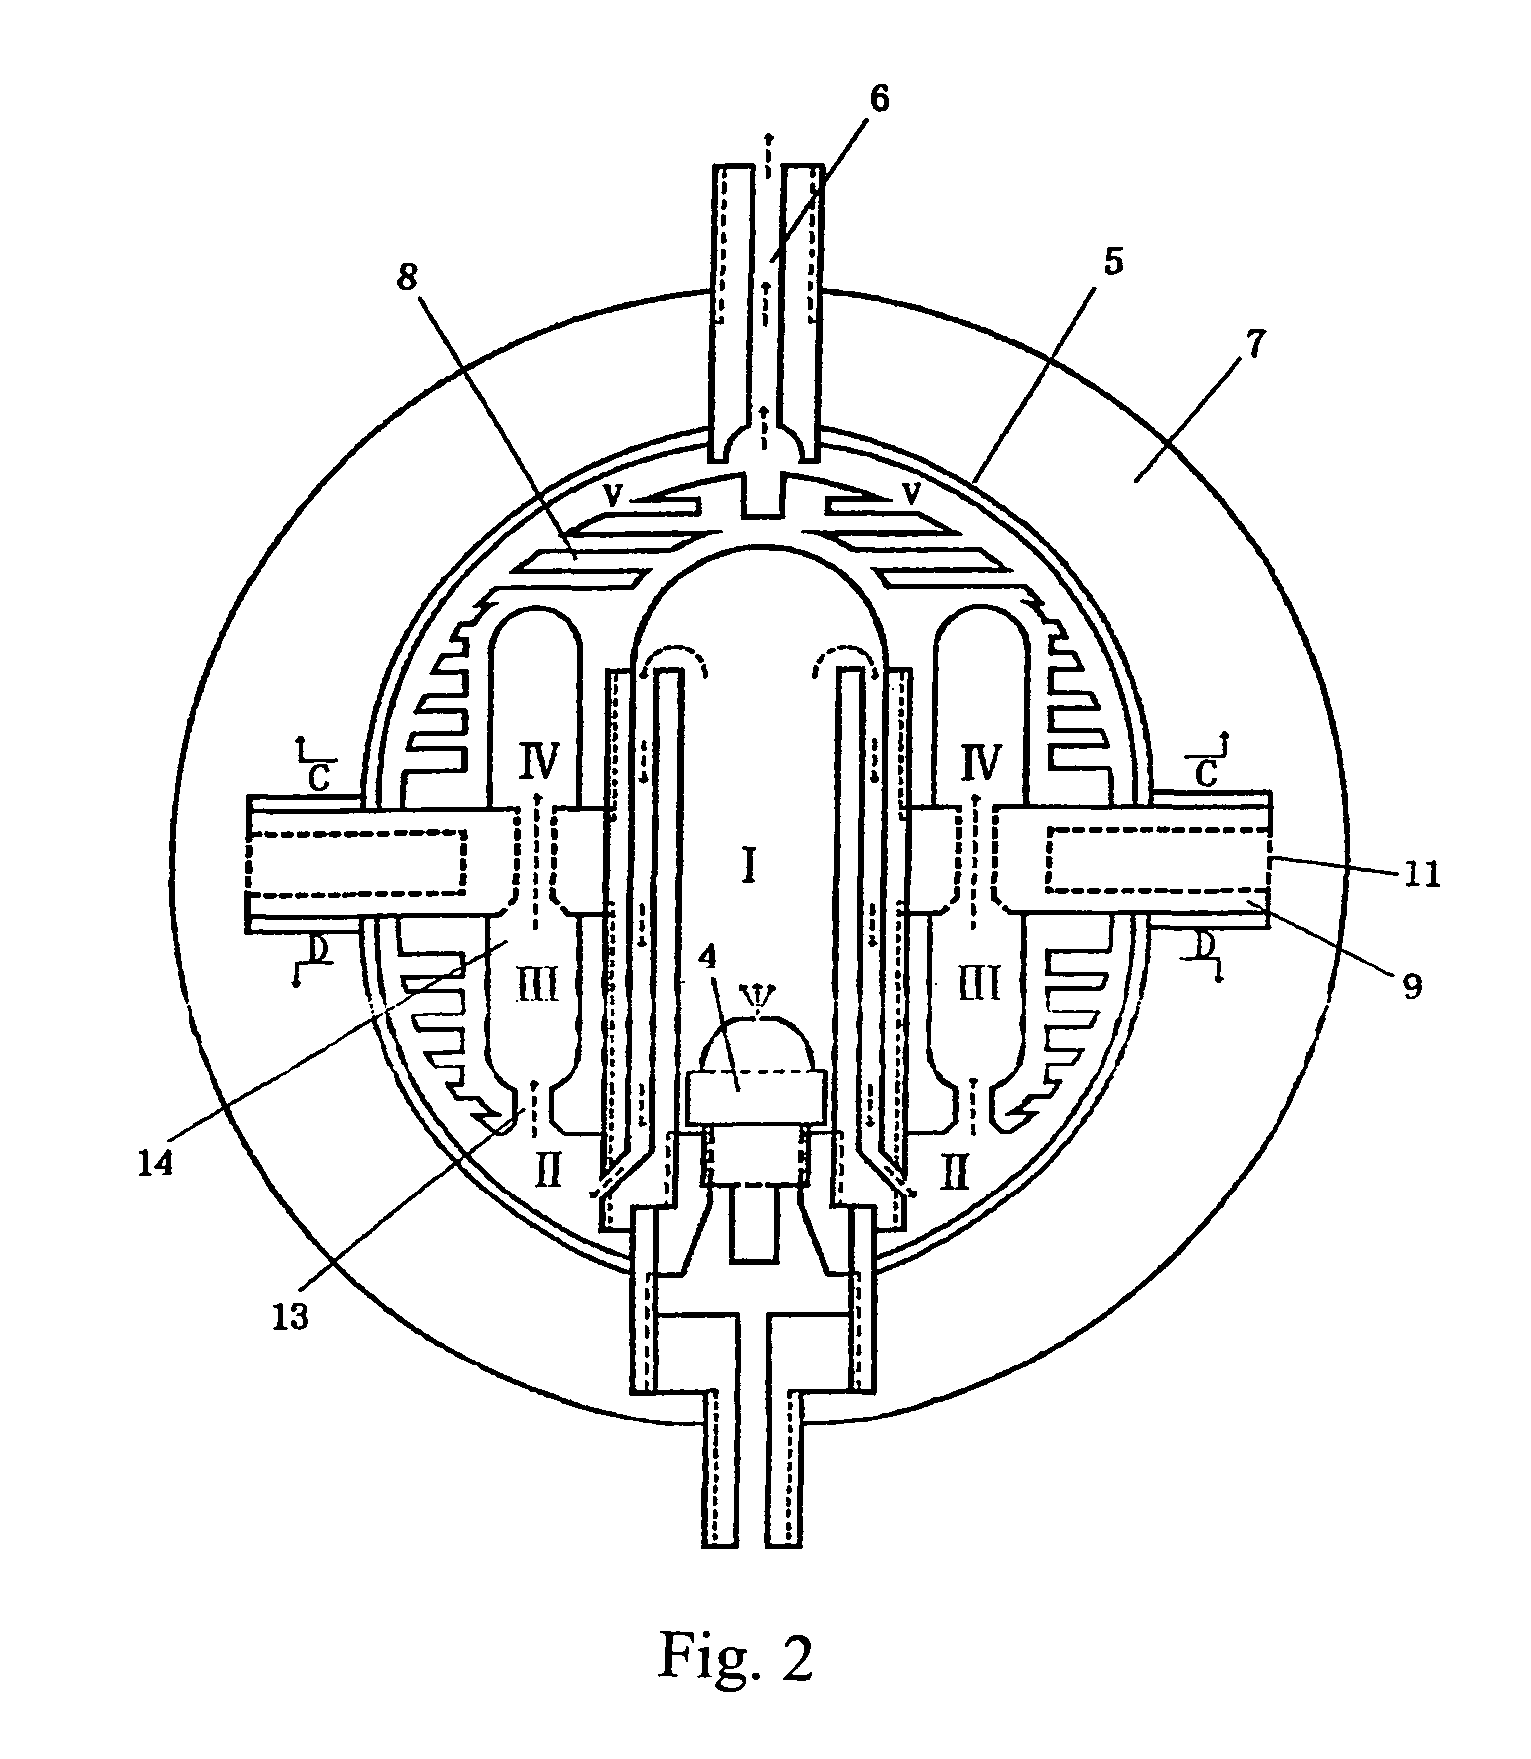 Equipment for producing high-pressure saturated steam